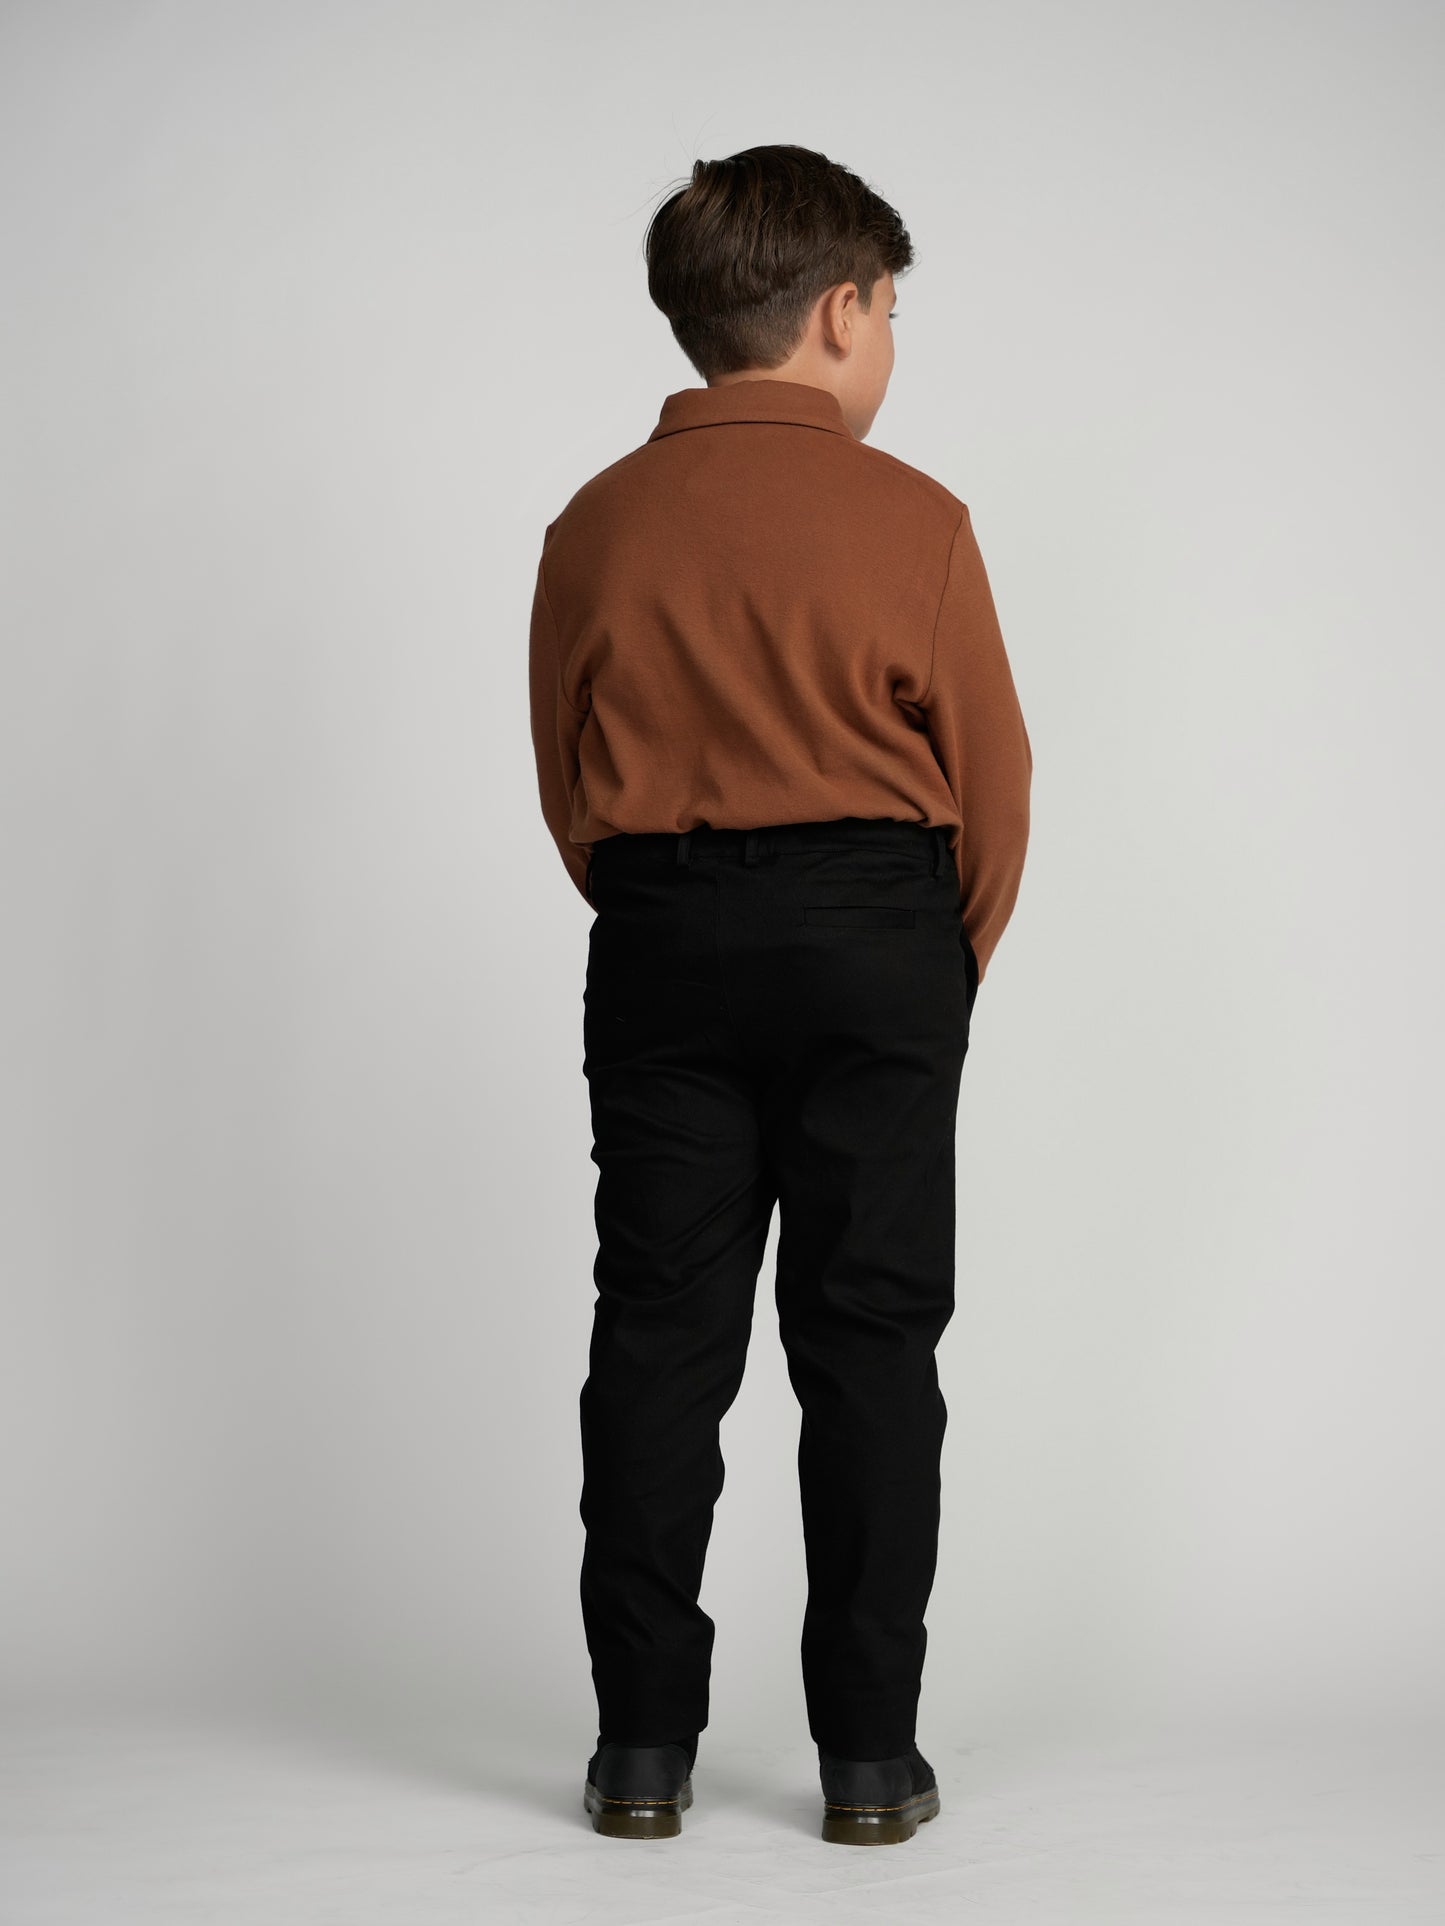 Black Casual Pants With Double Belt Loop